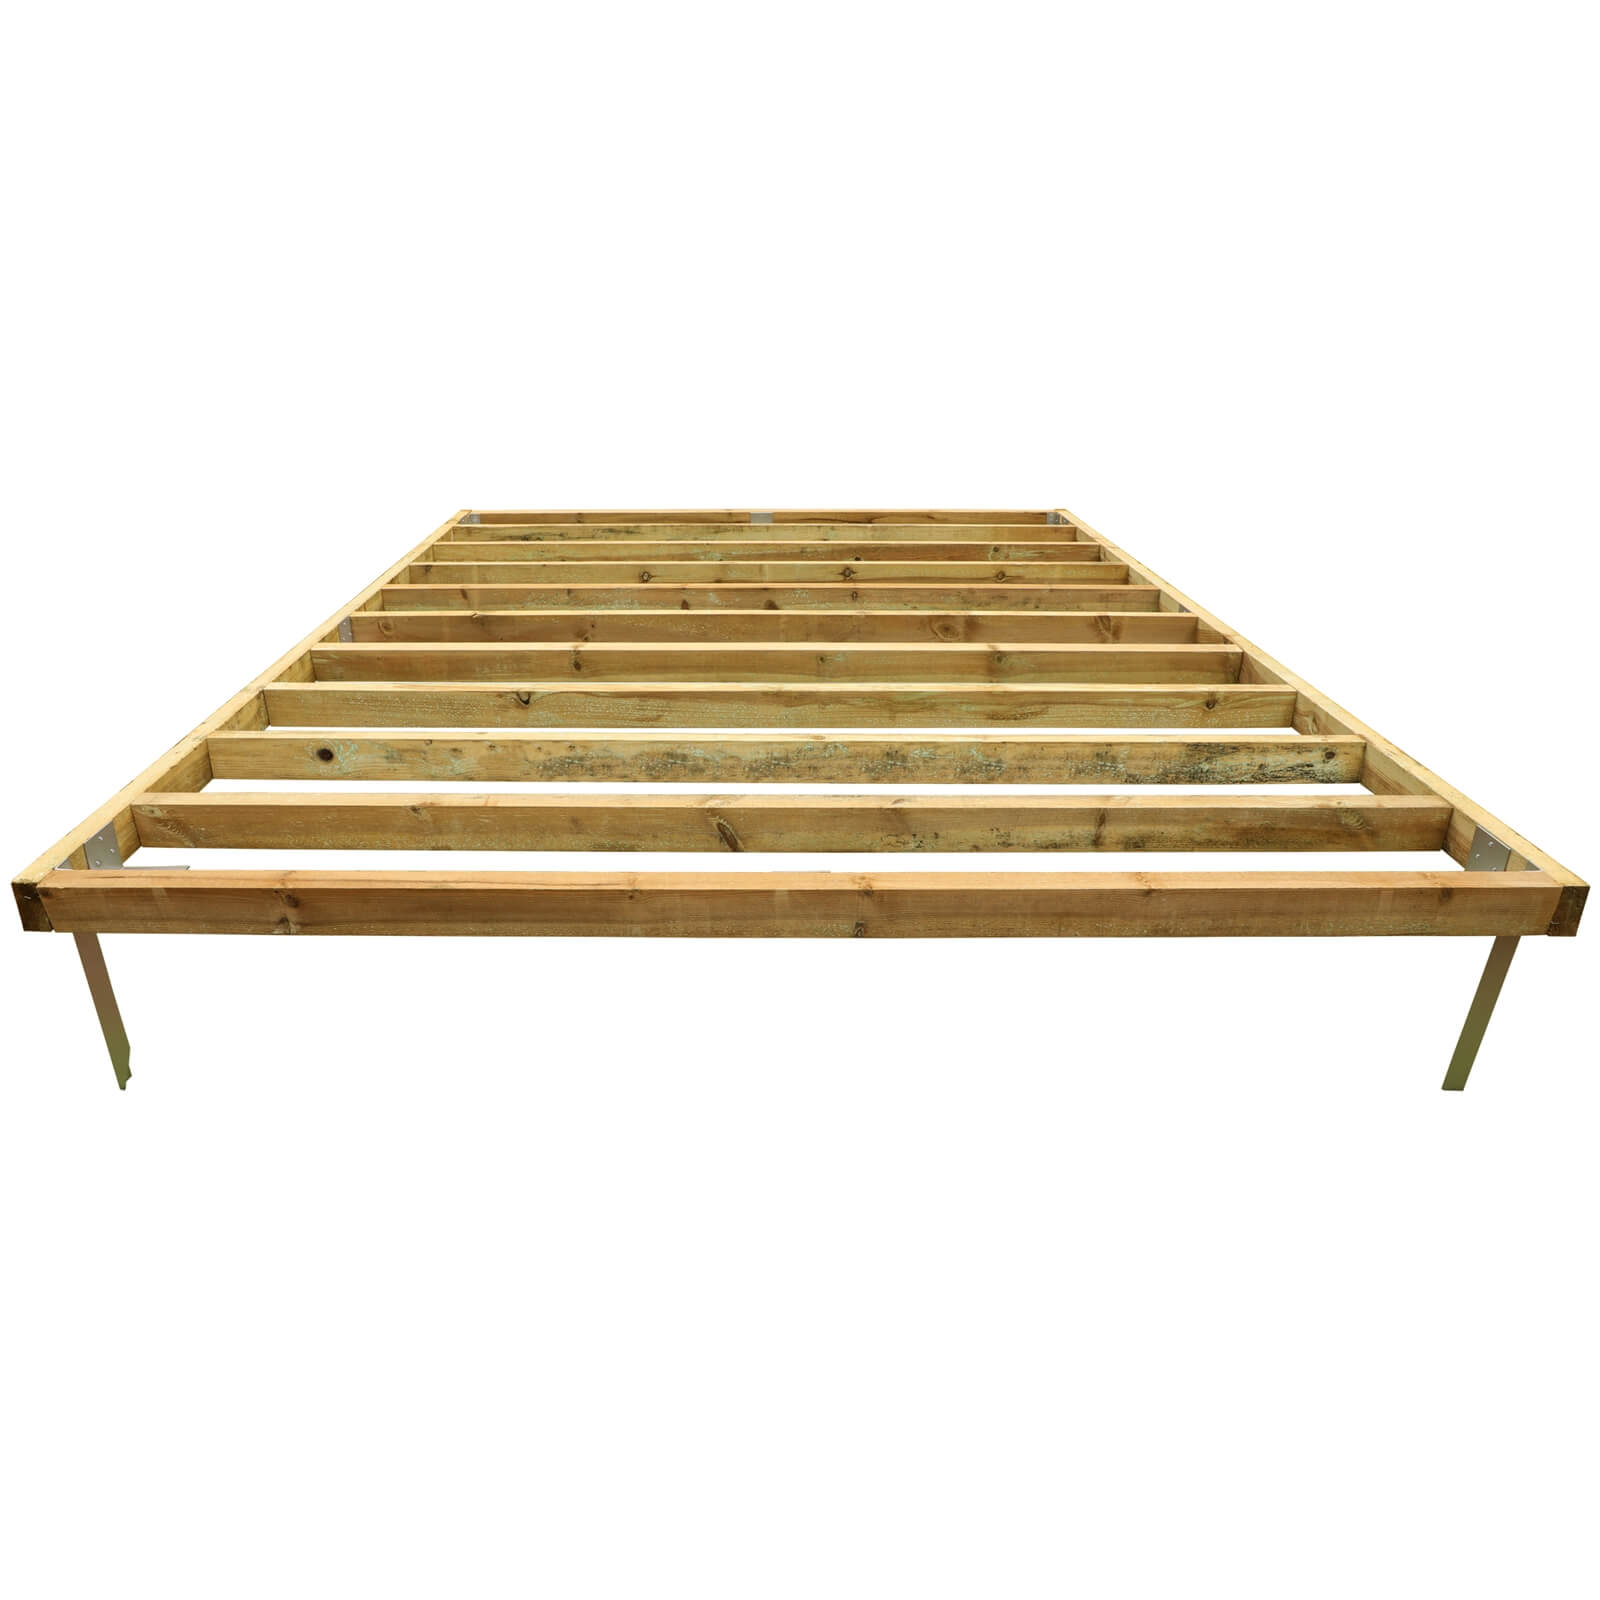 Mercia 10x8ft Pressure Treated Wooden Shed Base - Installation Included